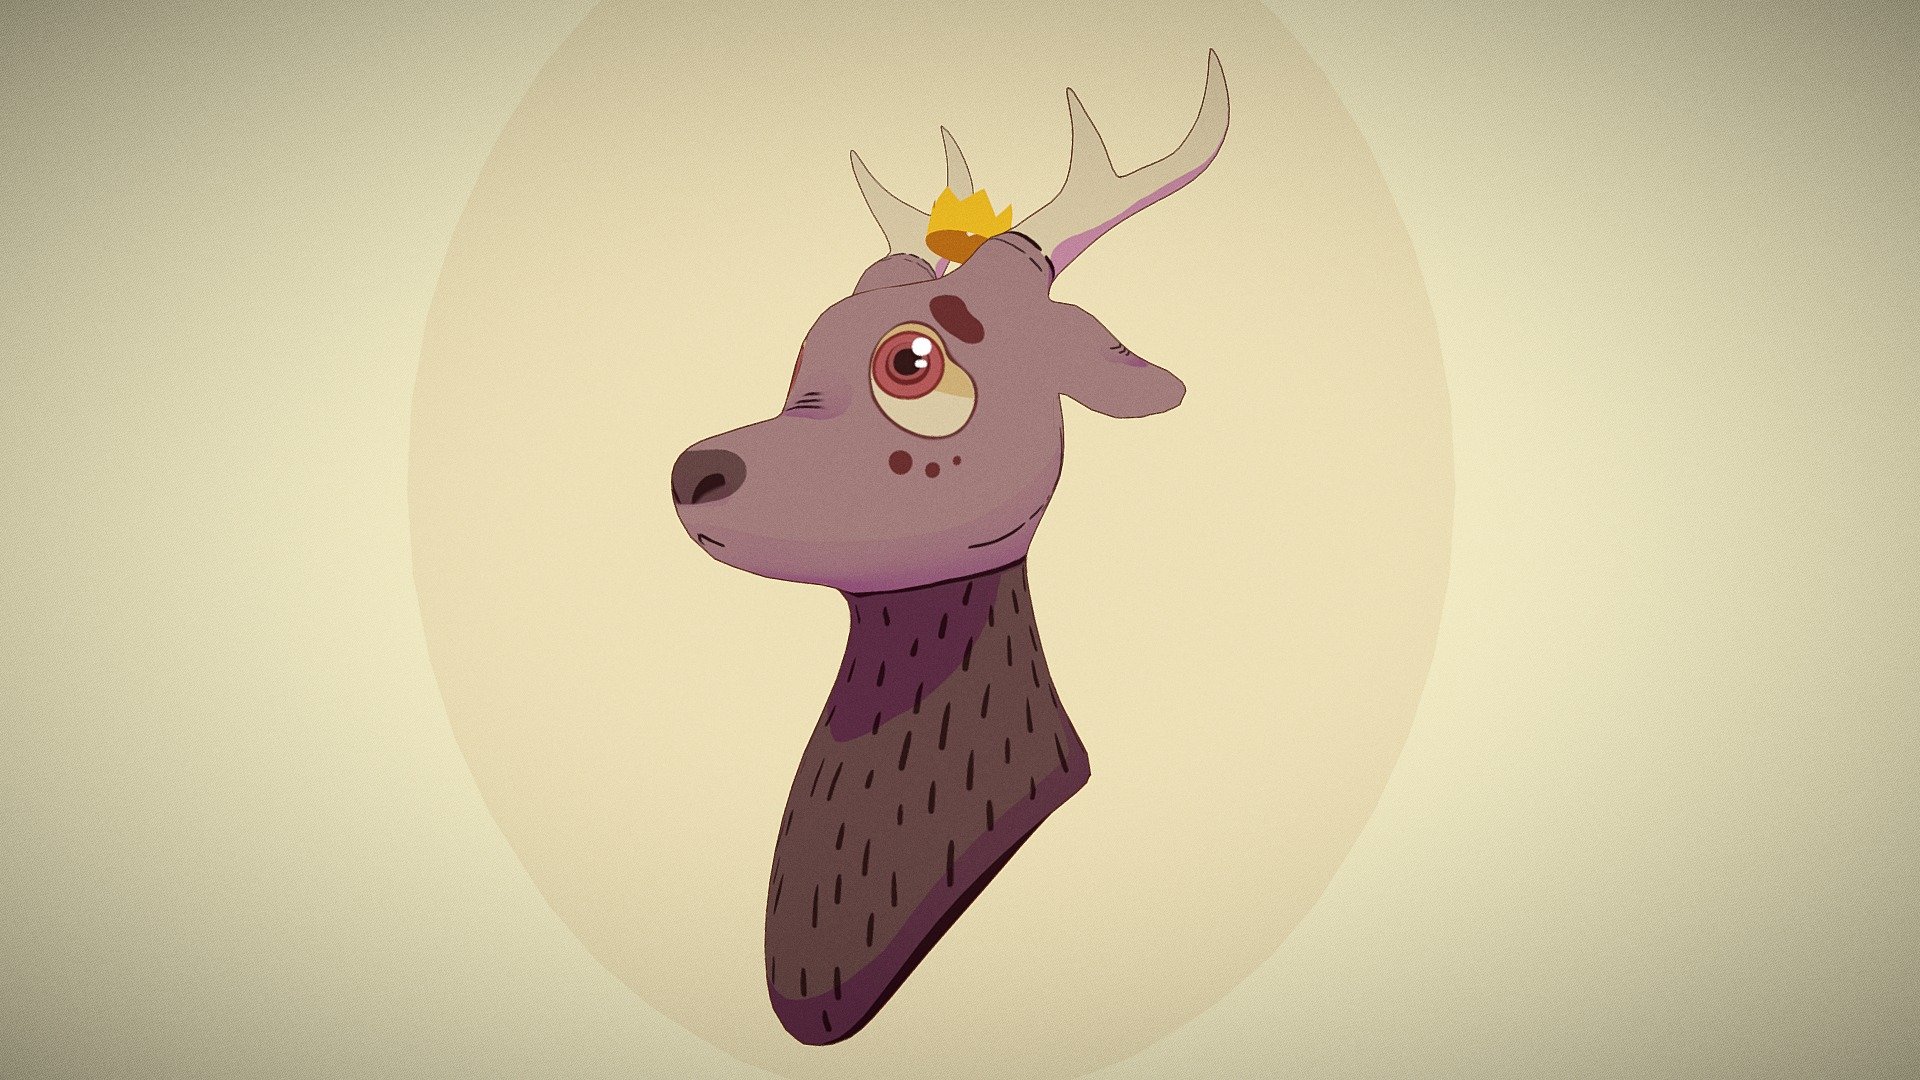 A very quick model inbetween projects. Here is a red deer, a little prince perhaps, a sweetie 

Programs: 
Maya, Substance Painter, zBrush - The Little Deer King - 3D model by CrimFox 3d model